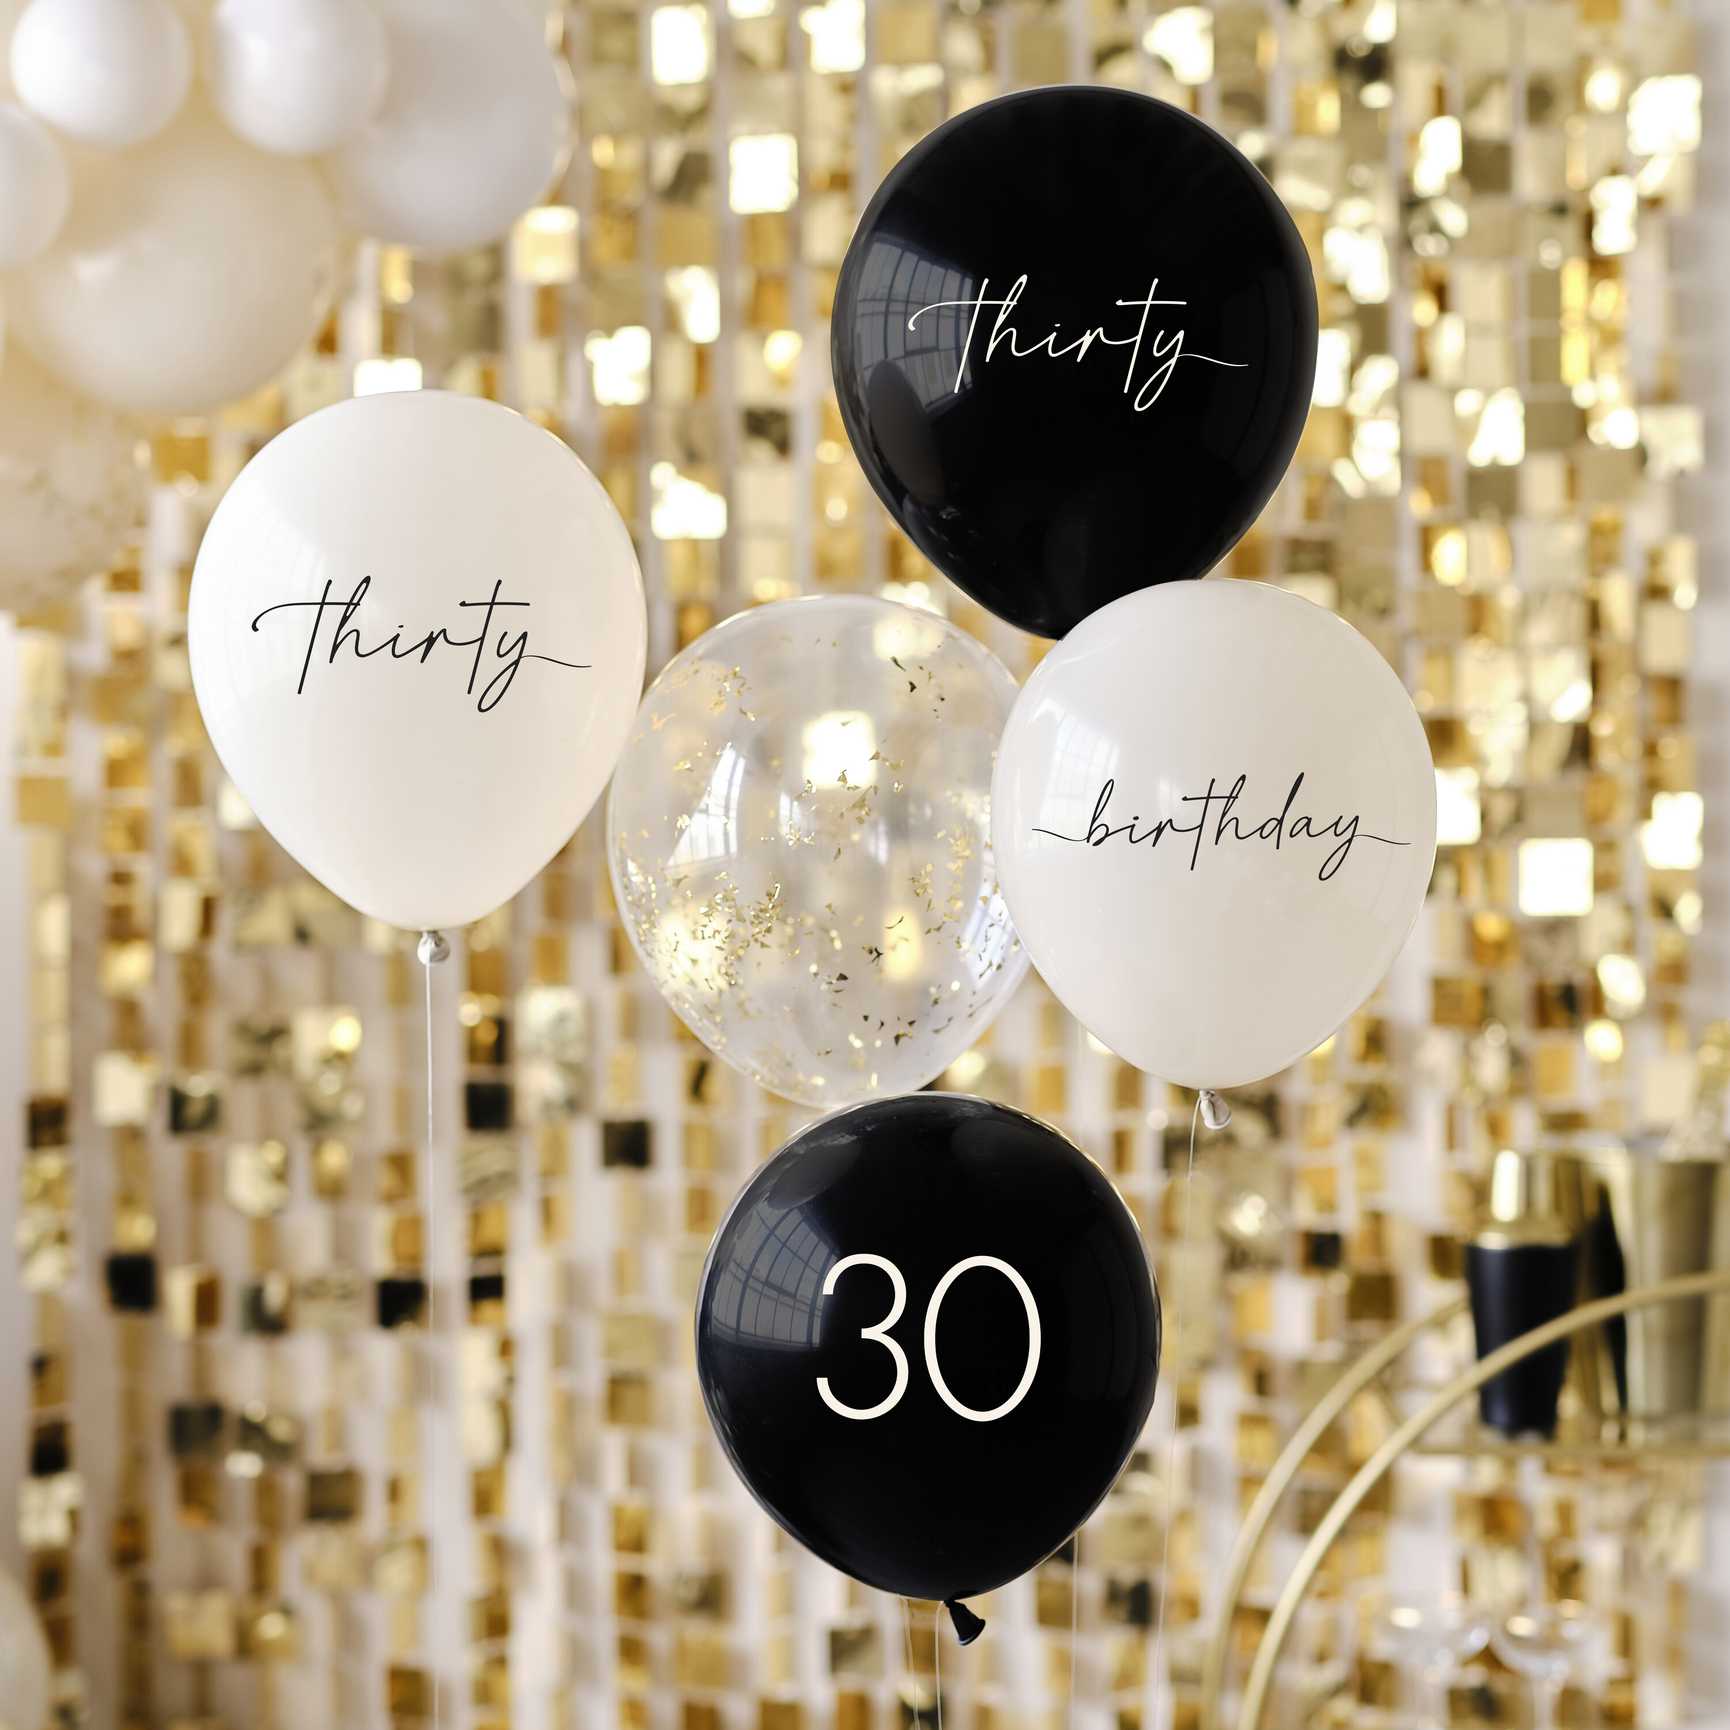 Ginger Ray Black, Nude, Cream and Champagne Gold 30th Birthday Party Balloons